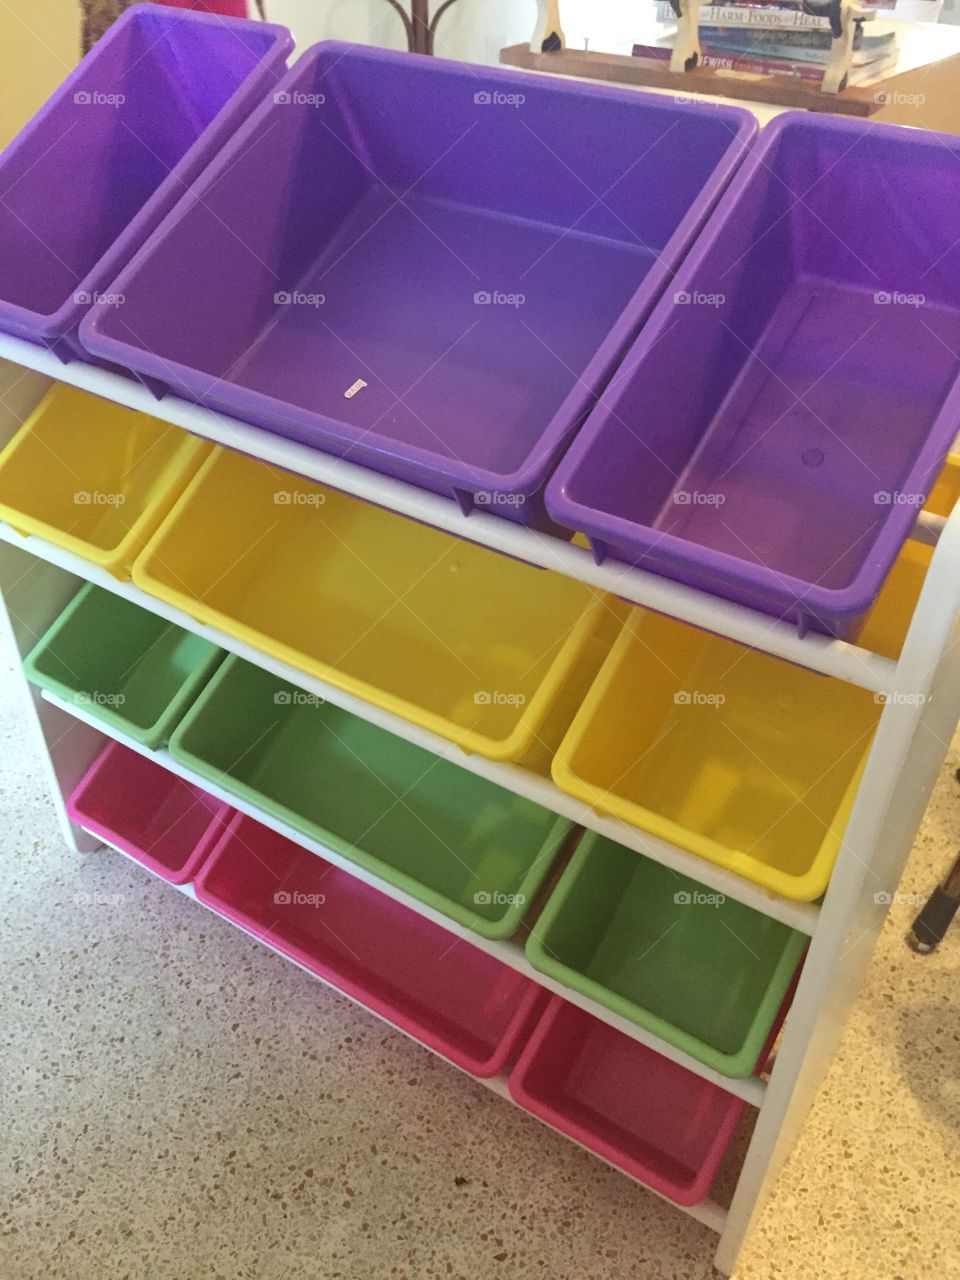 Organization. Different containers used to organize material